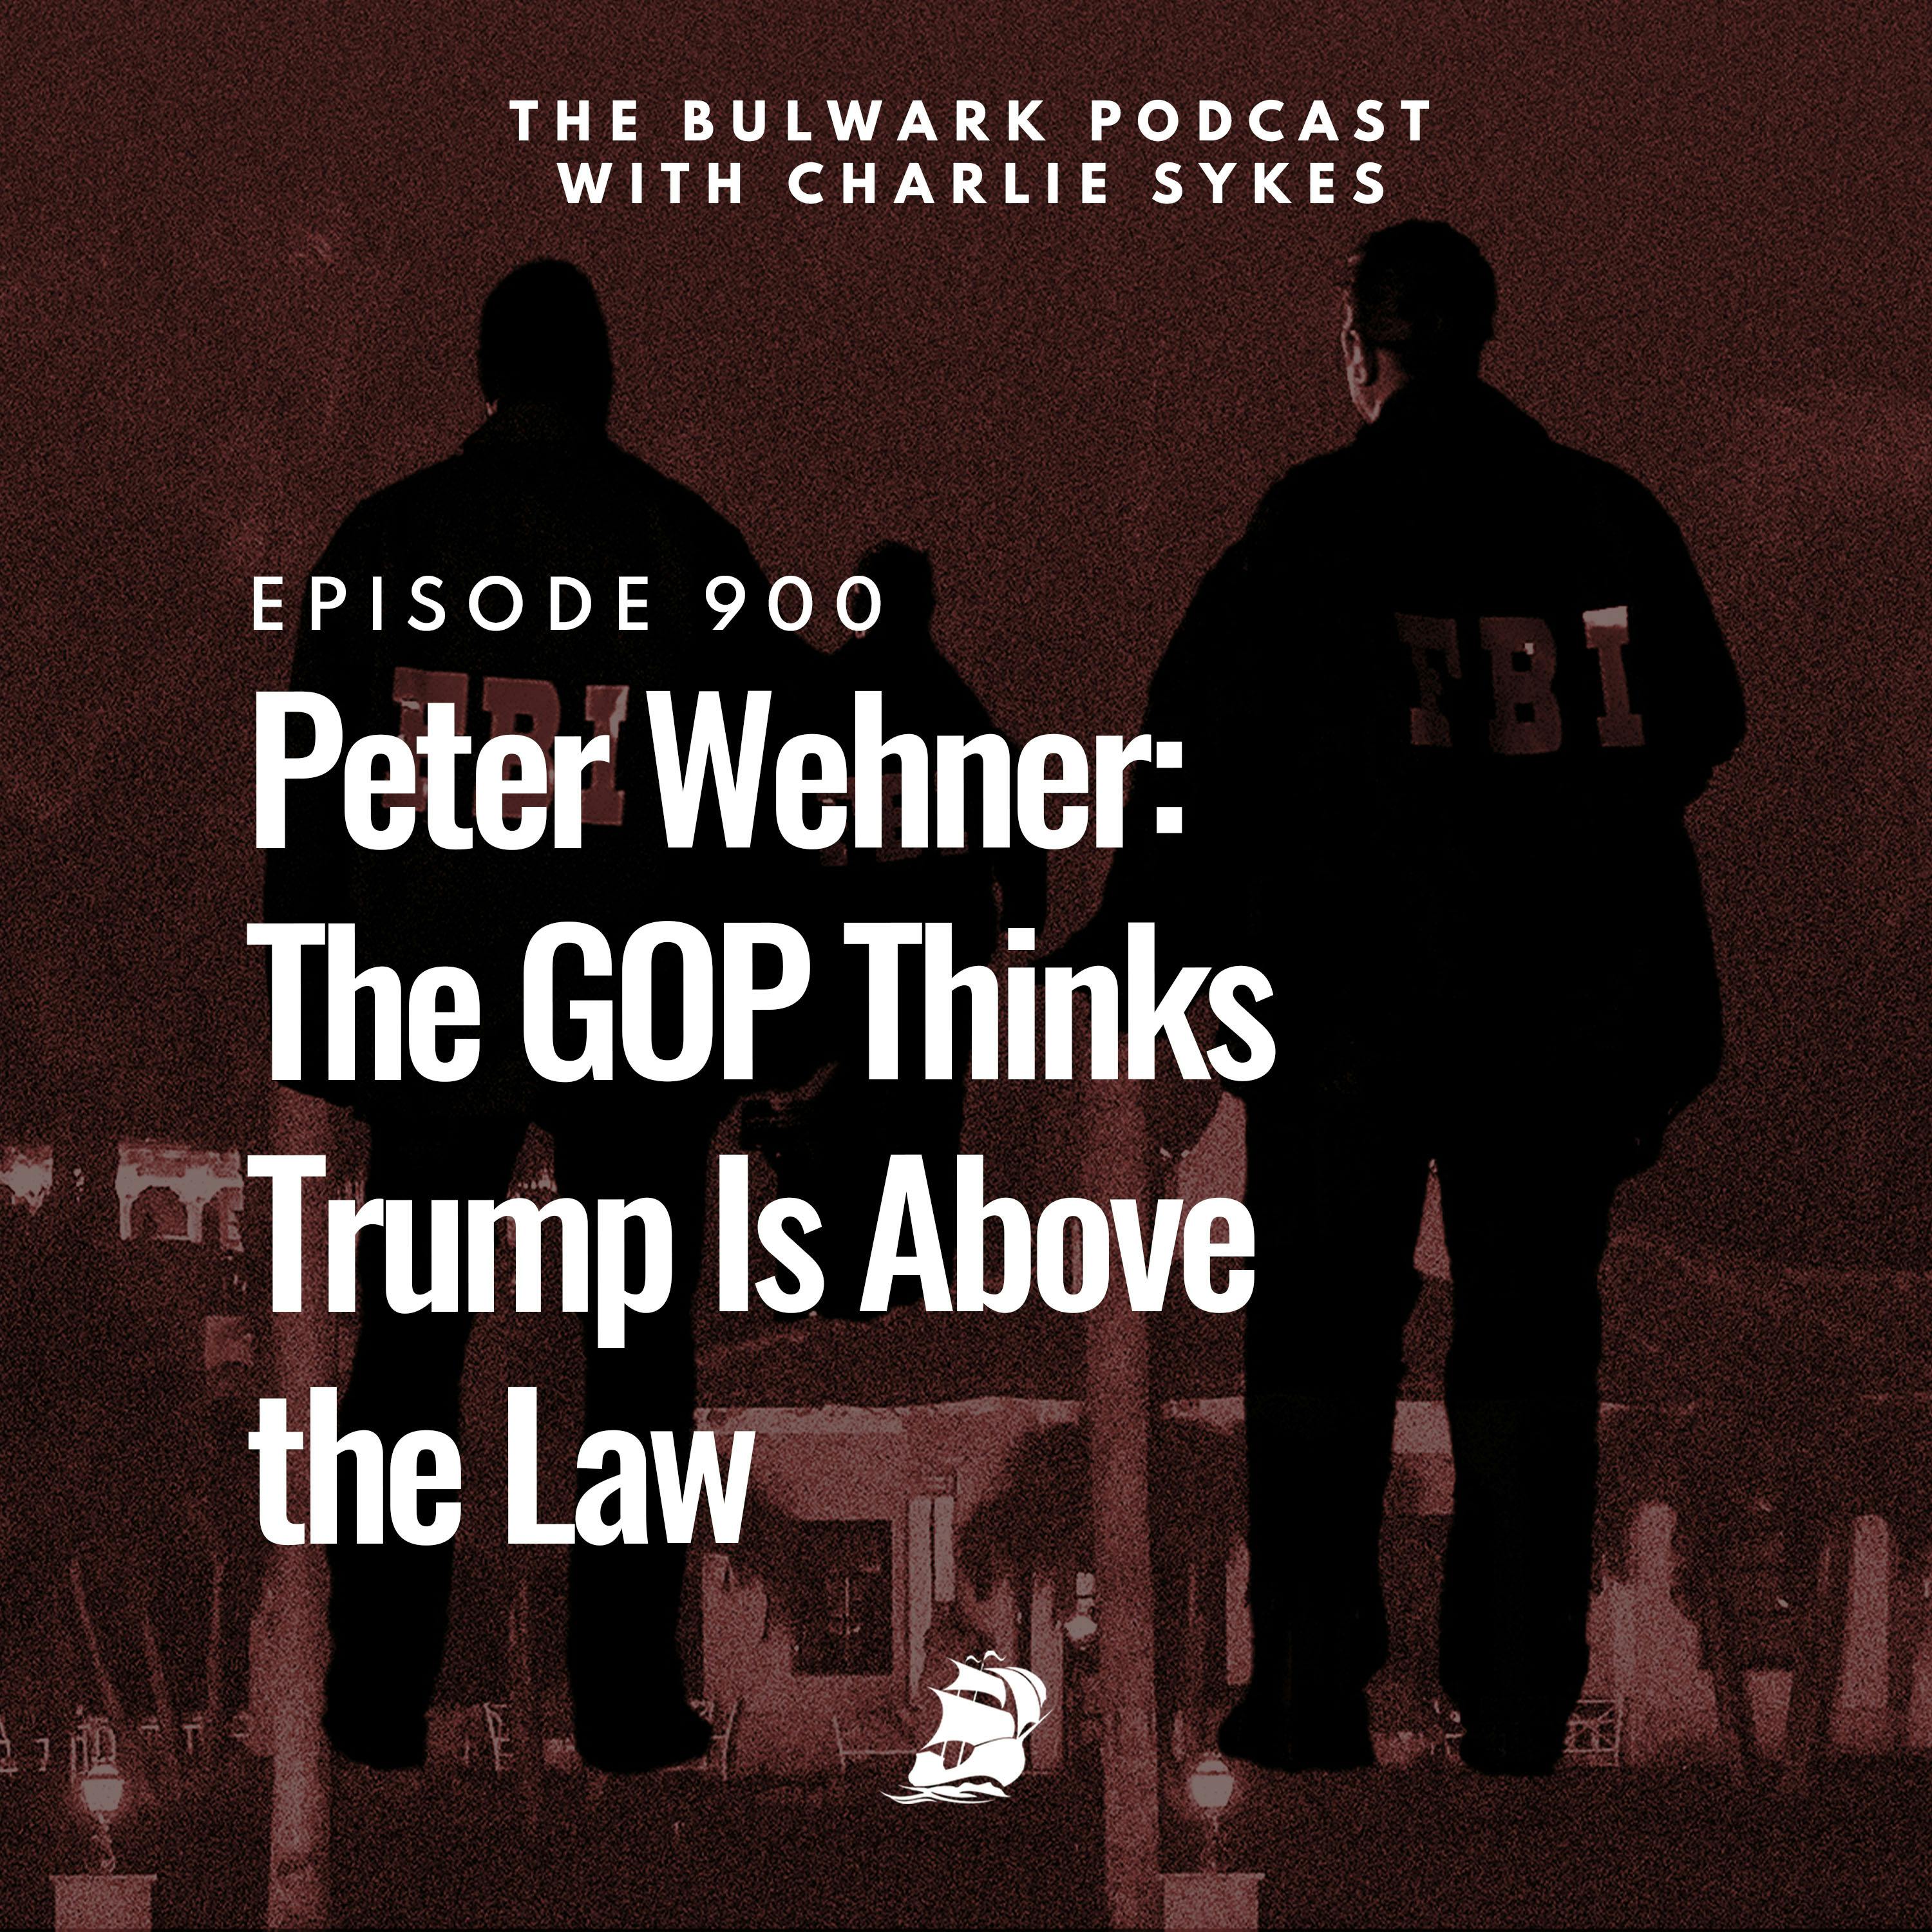 Peter Wehner: The GOP Thinks Trump Is above the Law